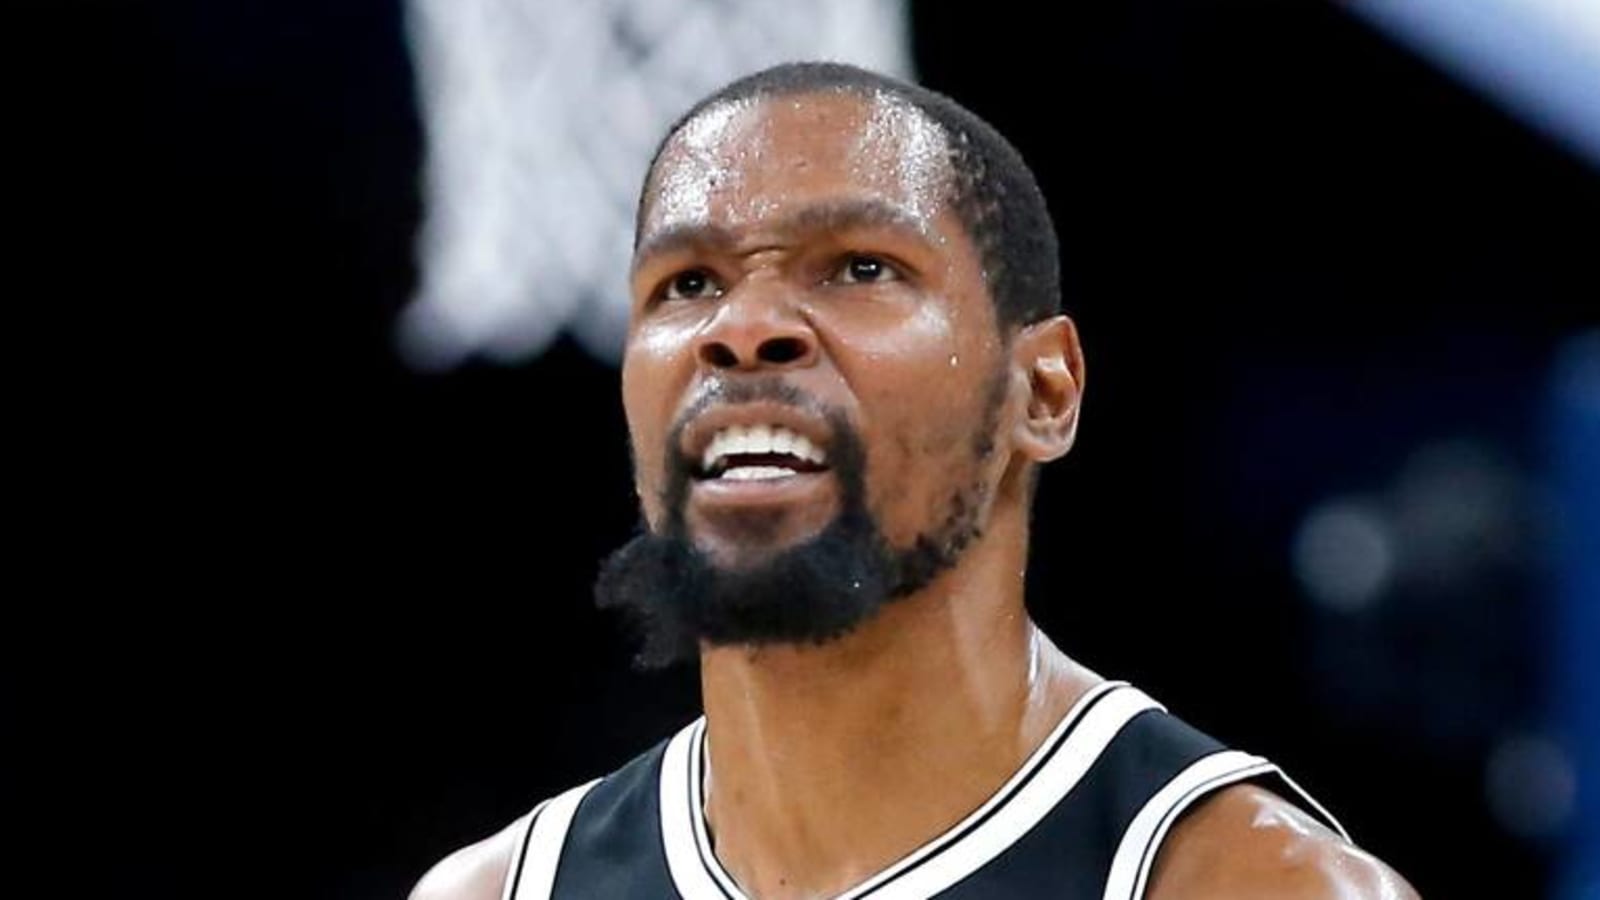 Report: Nets hope to keep star Kevin Durant and 'run this team back'